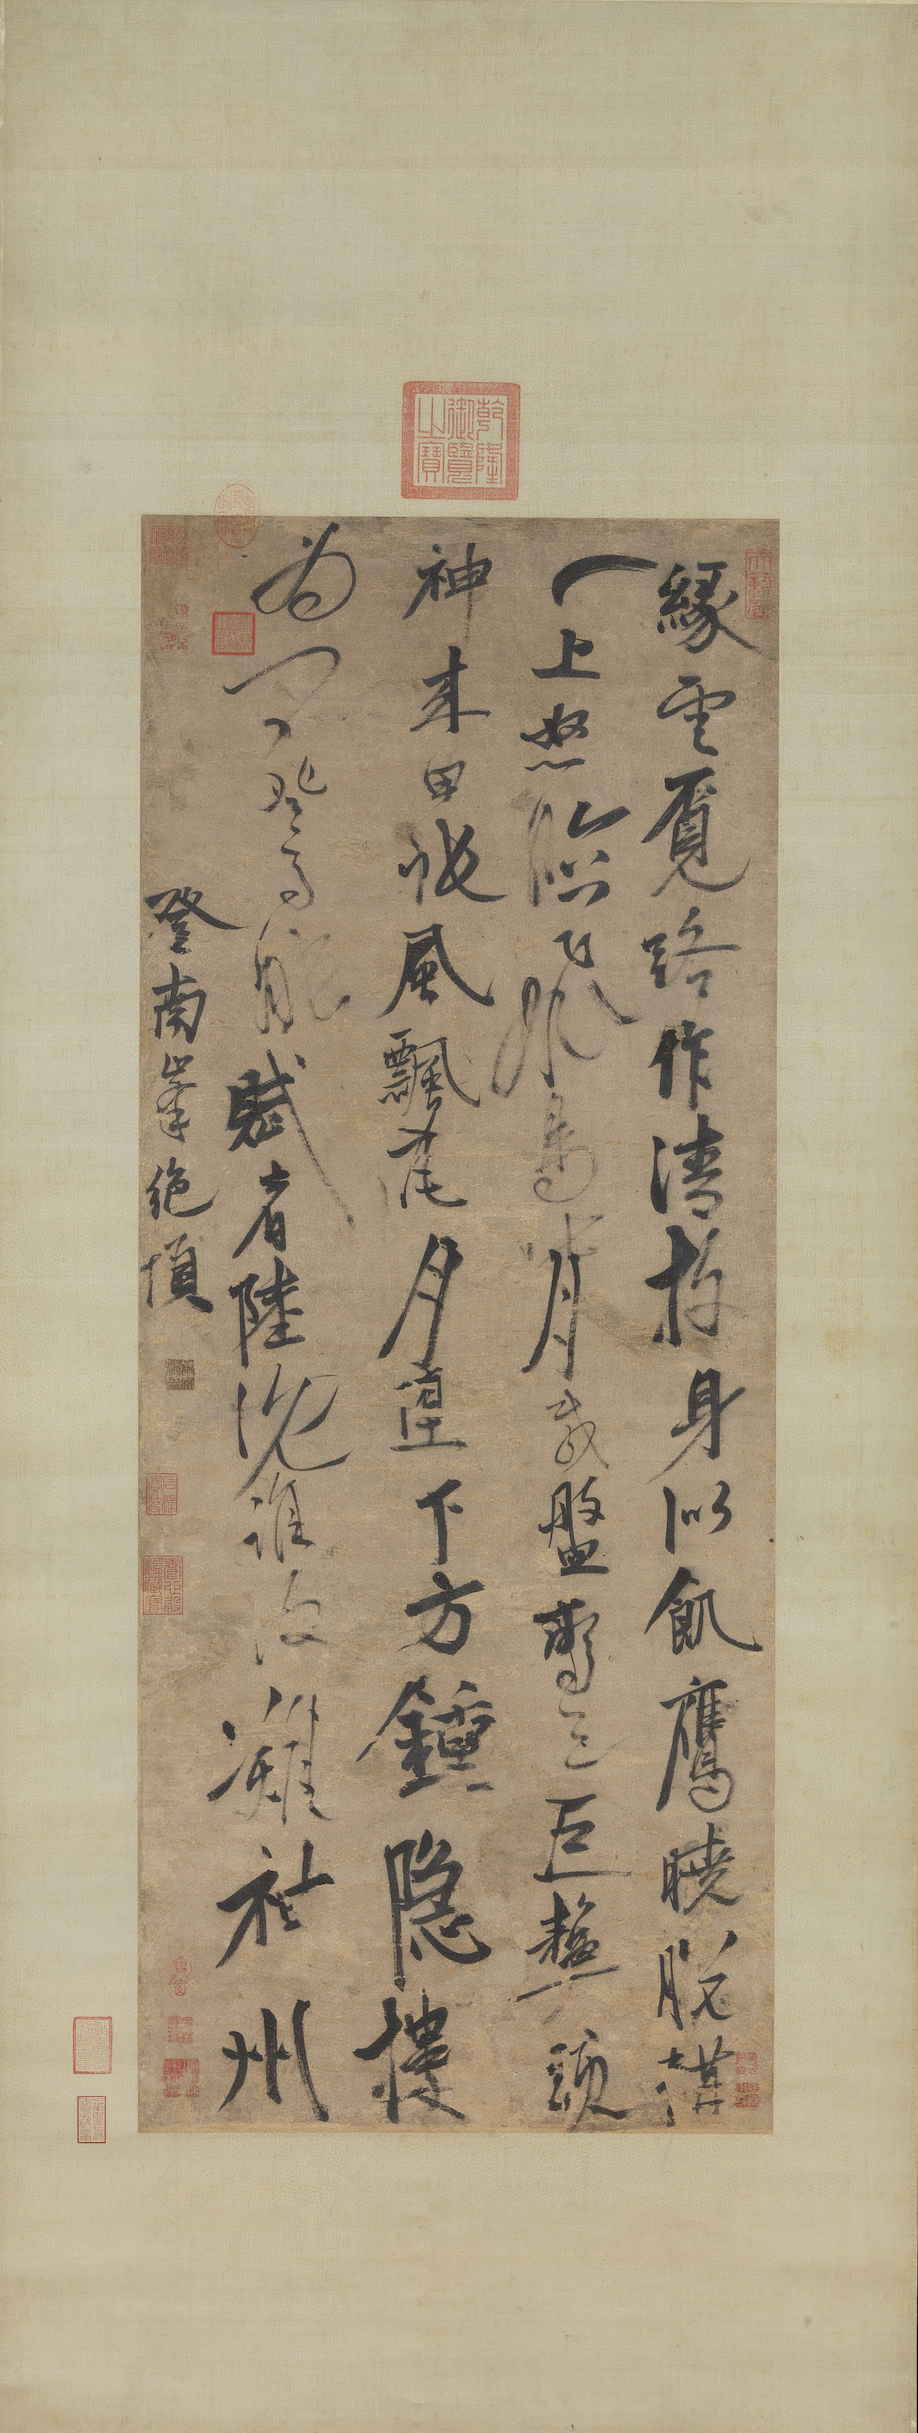 Other Calligraphy in National Palace Museum, part2